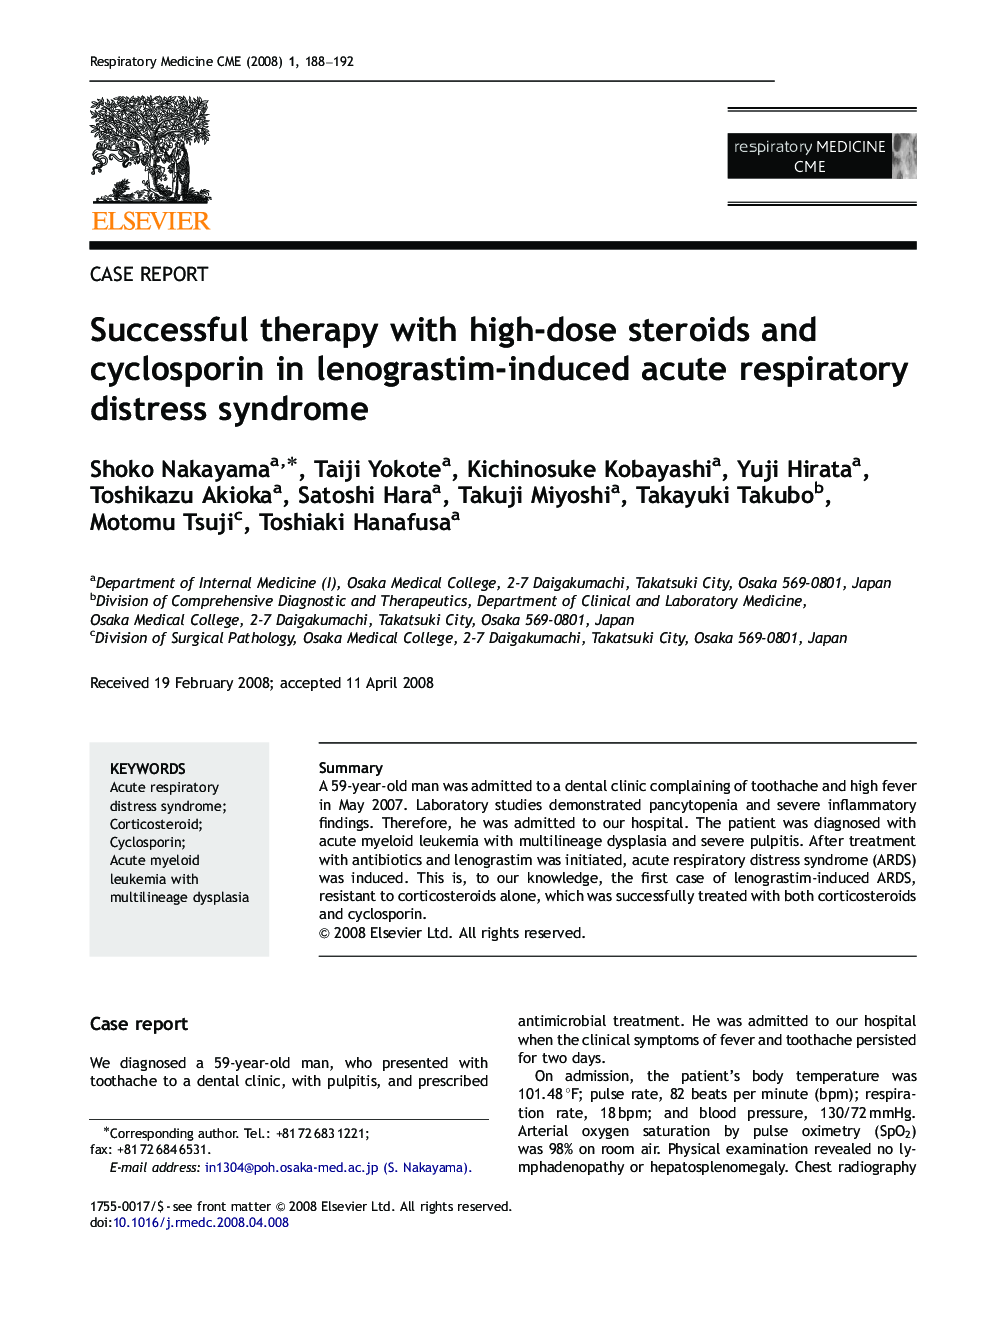 Successful therapy with high-dose steroids and cyclosporin in lenograstim-induced acute respiratory distress syndrome